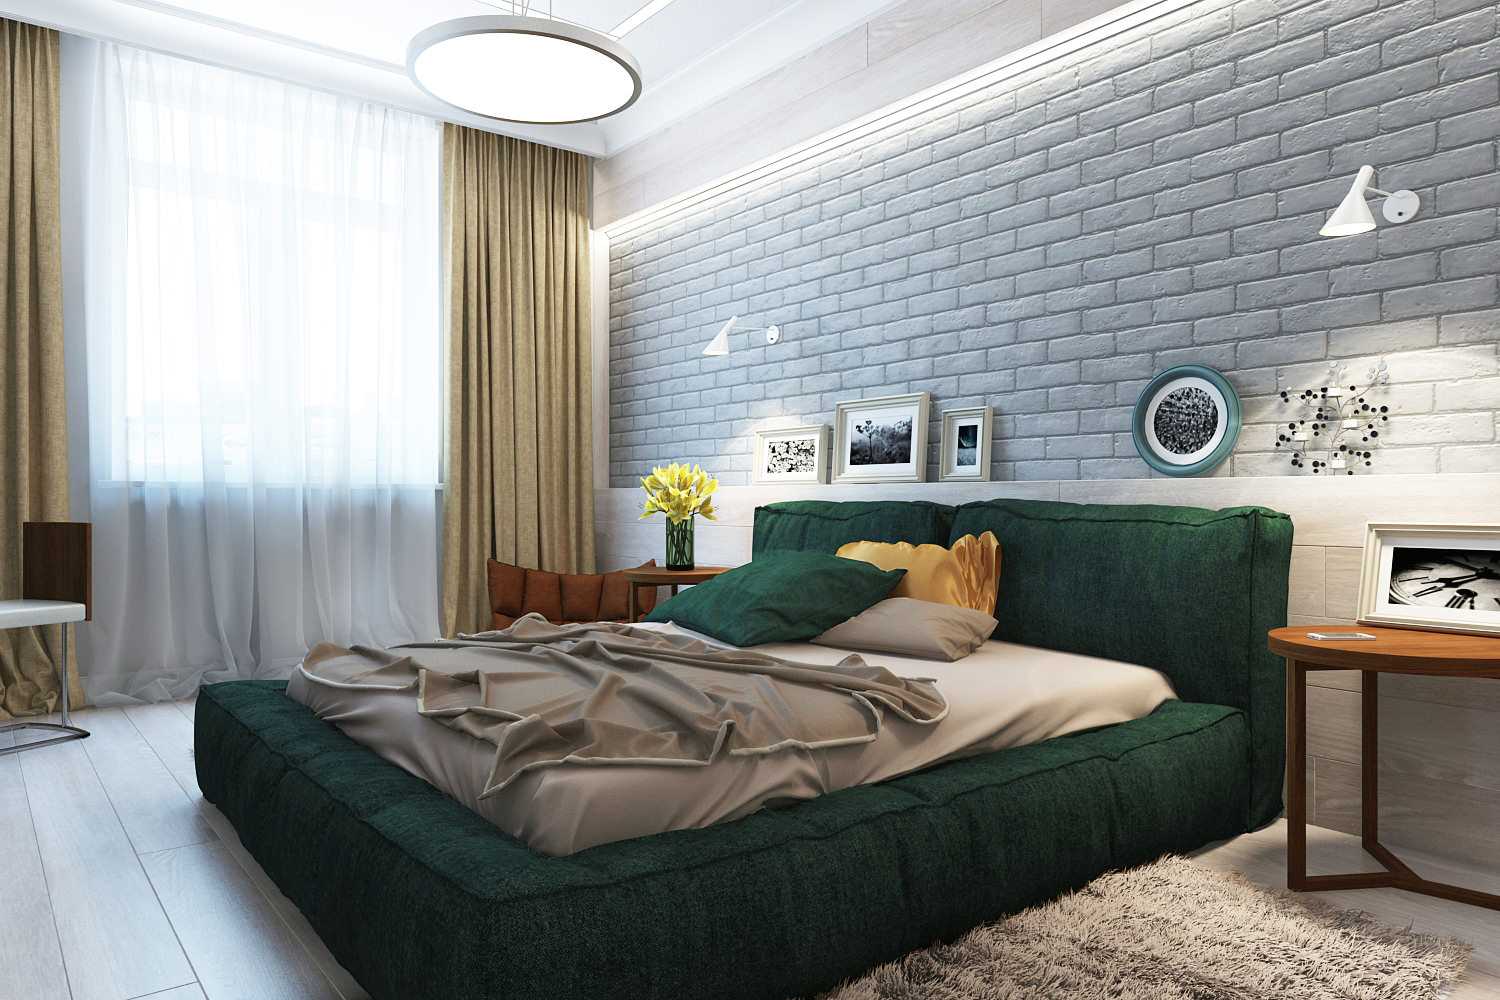 Dark green bed in the bedroom with a brick wall